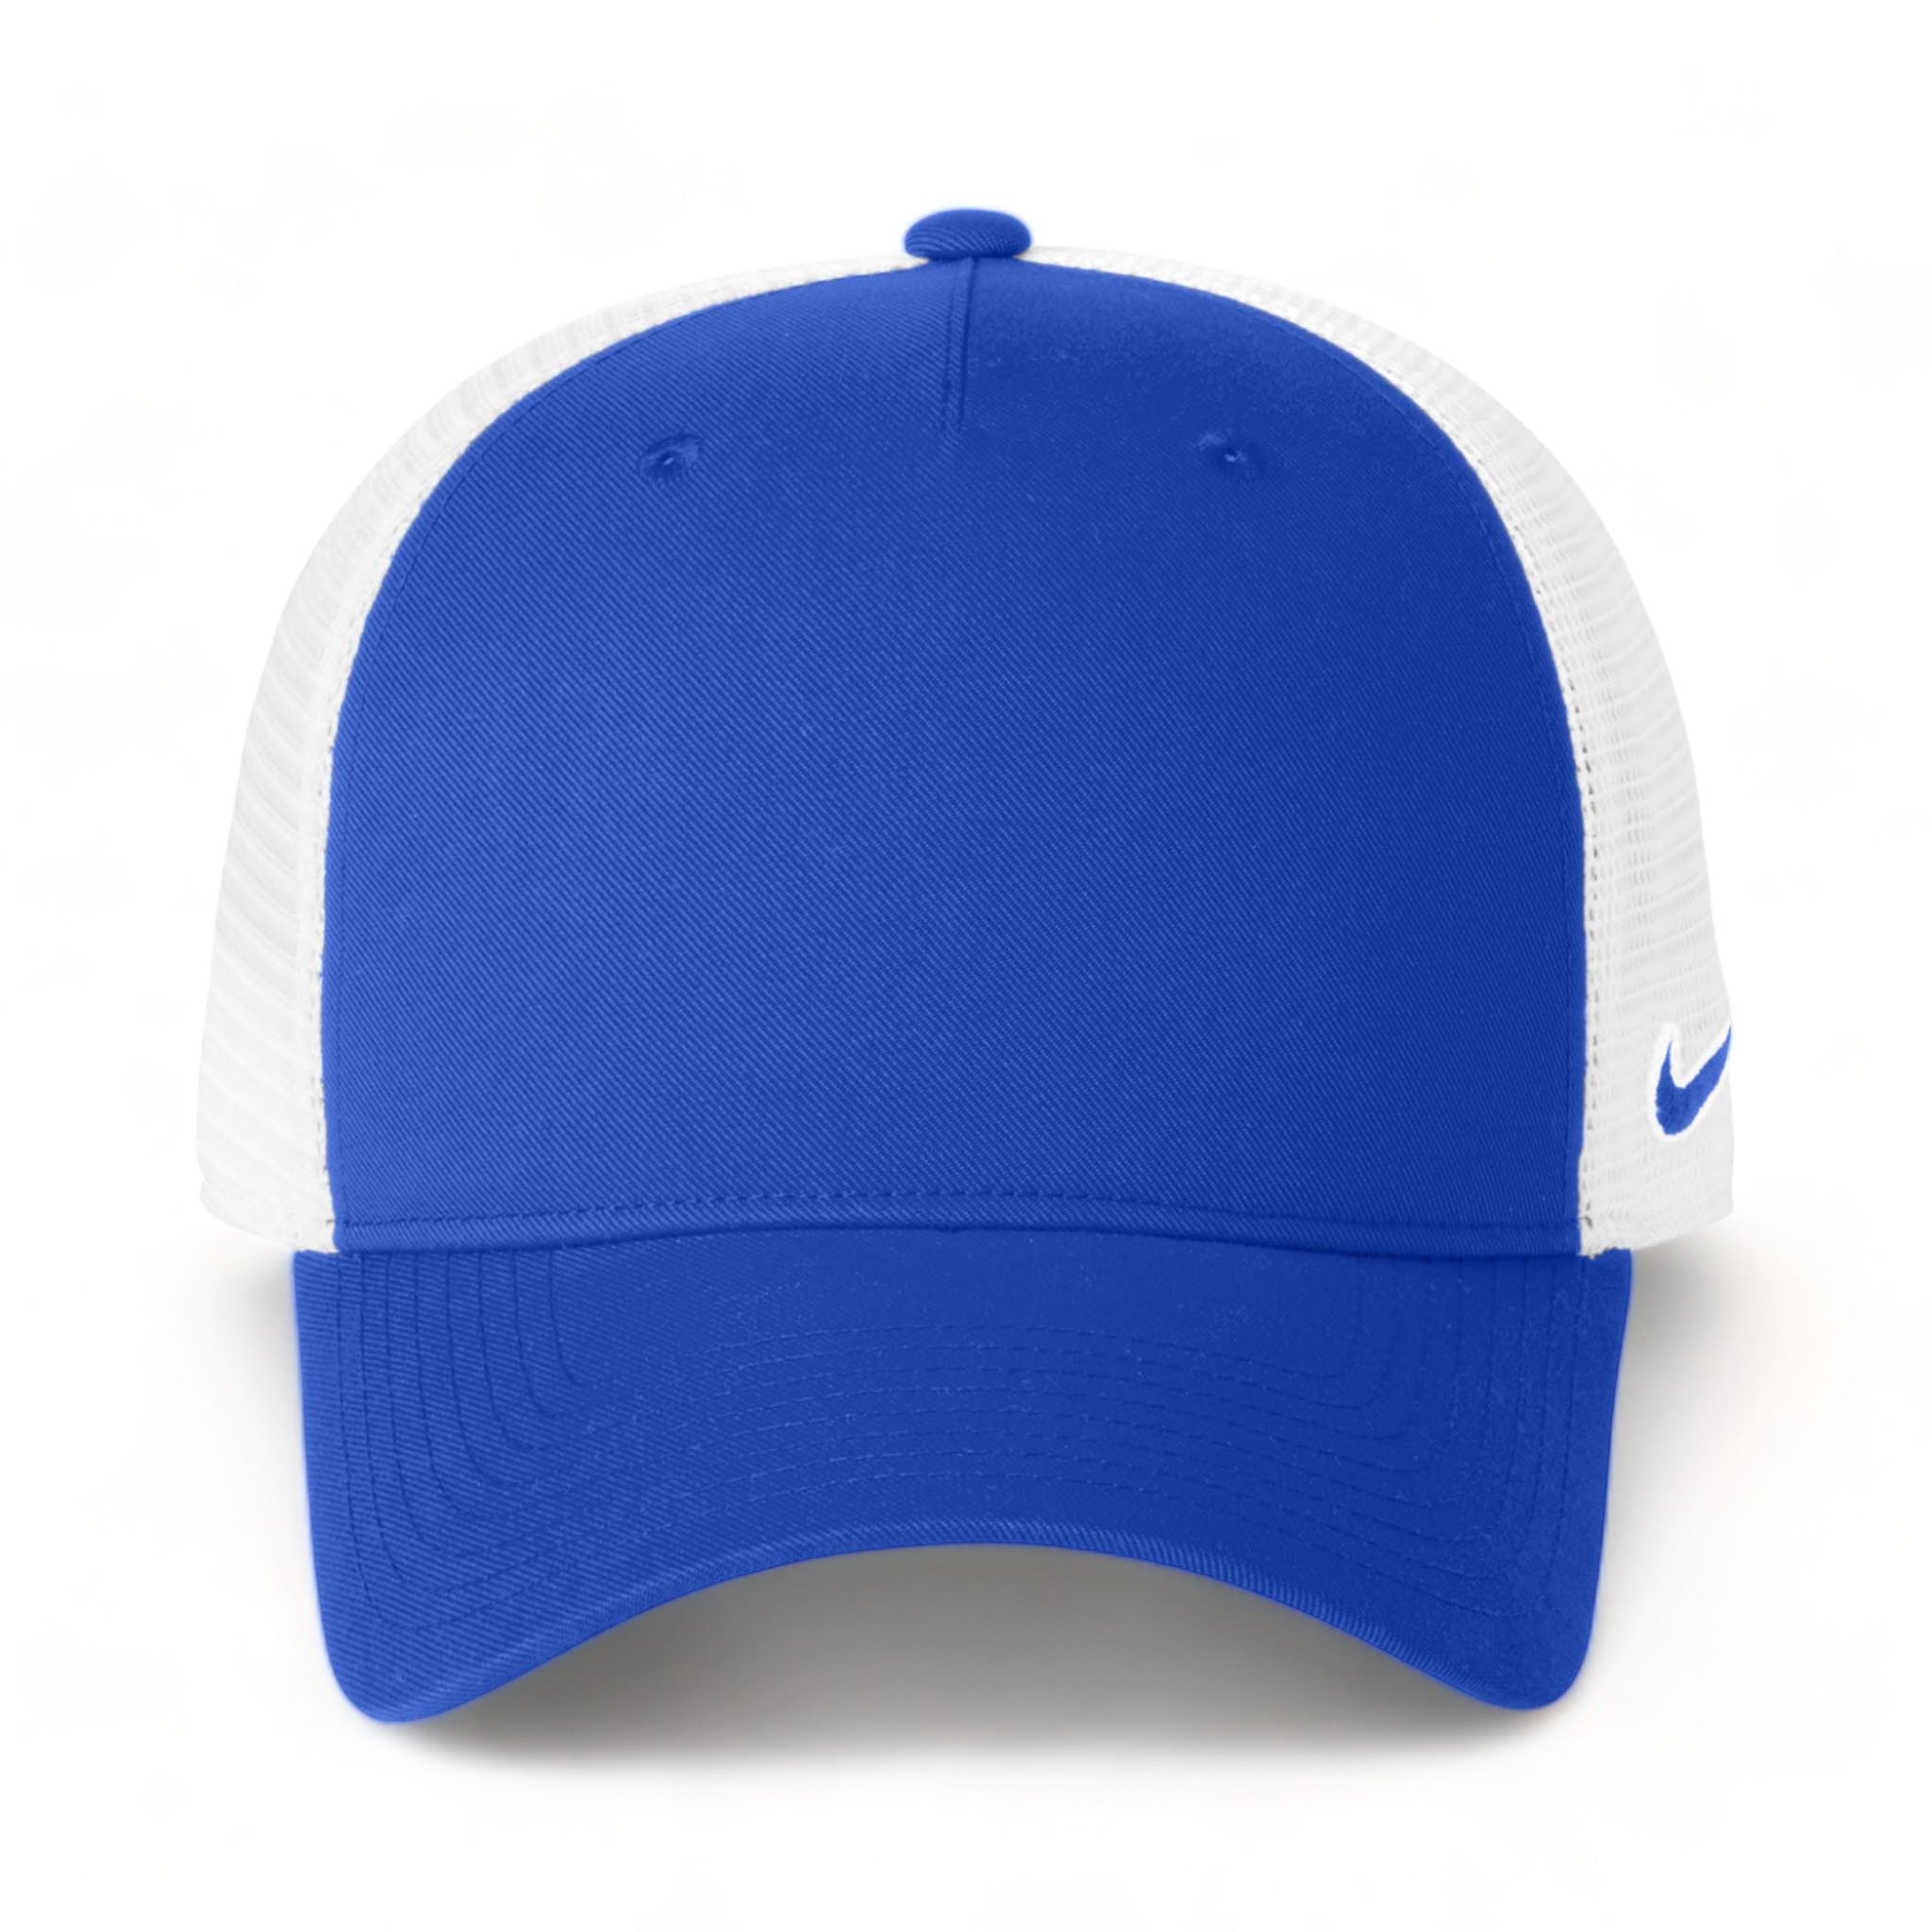 Front view of Nike NKFN9893 custom hat in game royal and white